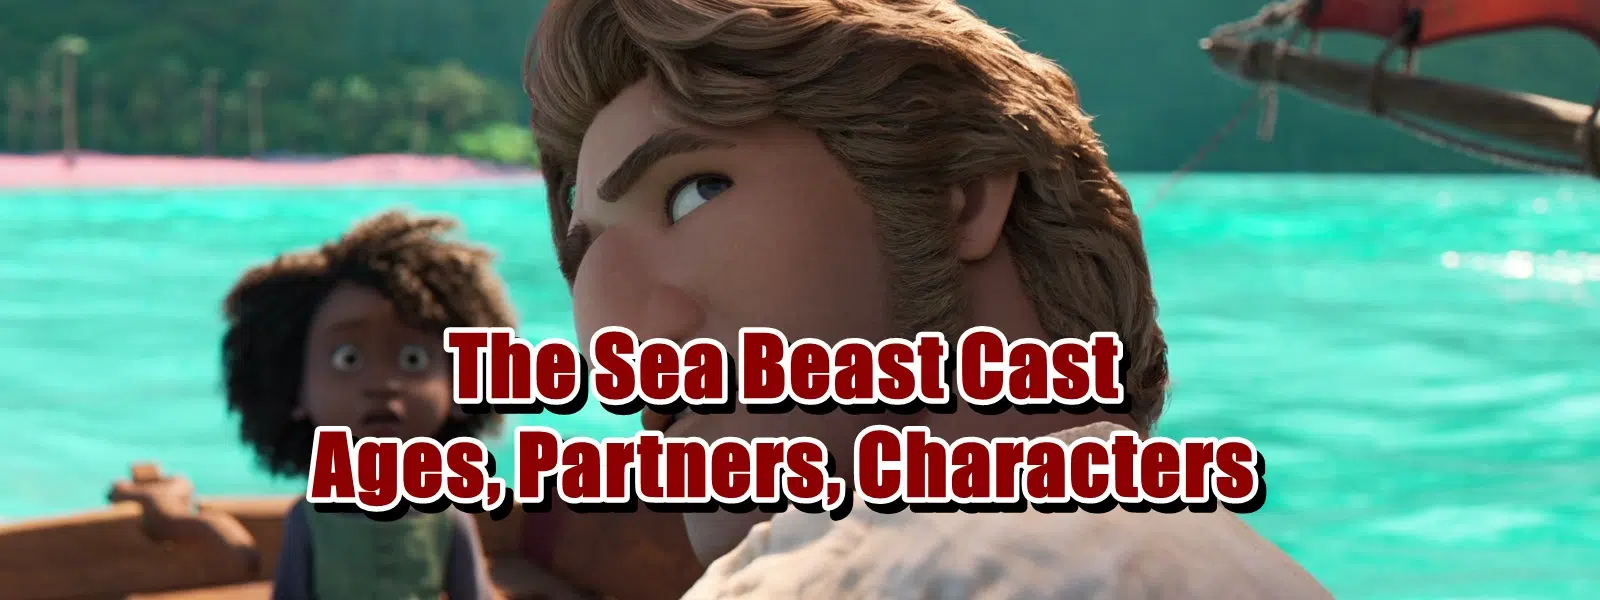 The Sea Beast Cast - Ages, Partners, Characters